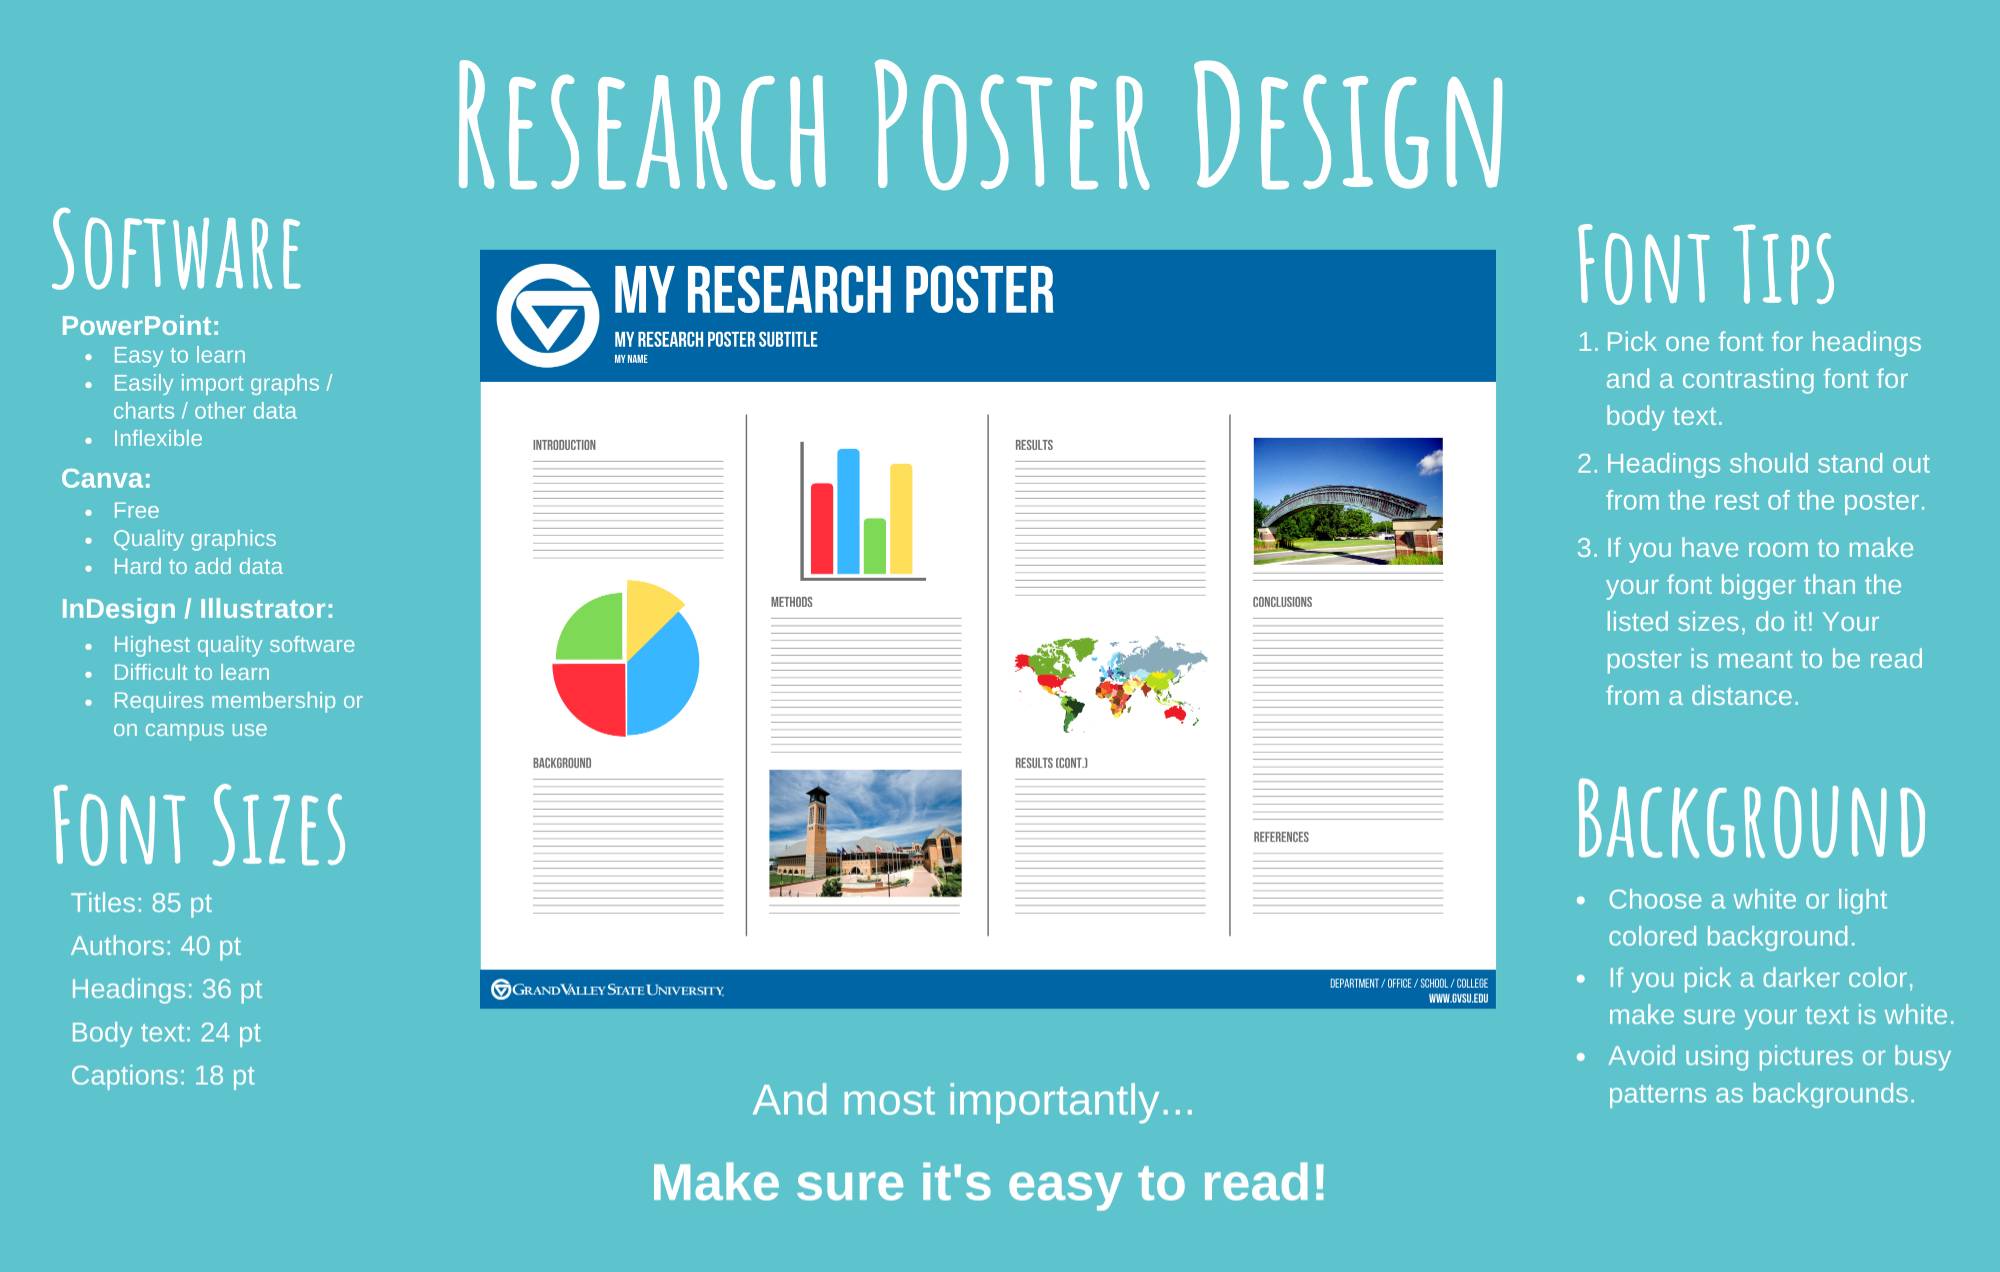 Research Poster Tips